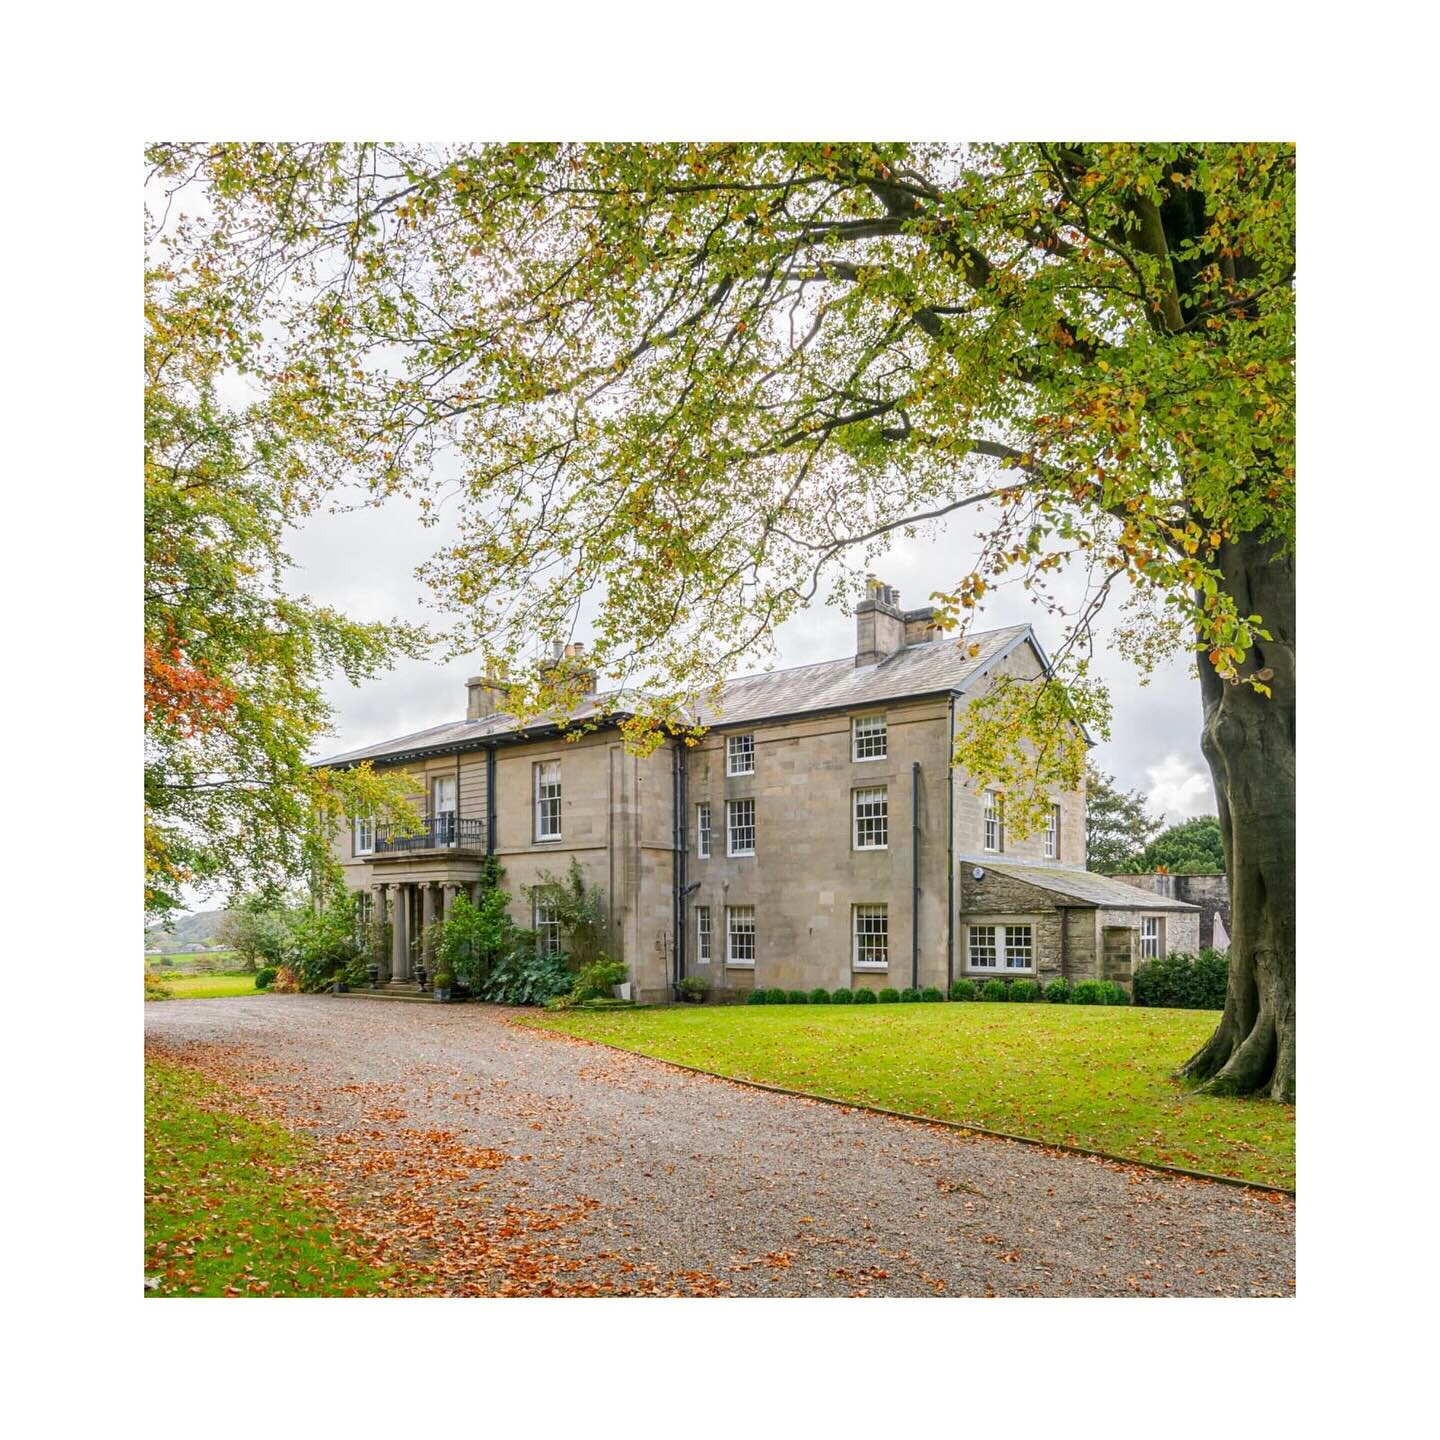 Taitlands Estate, BD24

A Grade II listed Stately home in the Yorkshire Dales, accommodating large filming jobs, events and shoot and stay. Please contact Location Creation for more information. 

Features:
&bull; Walled gardens, paddock and views of